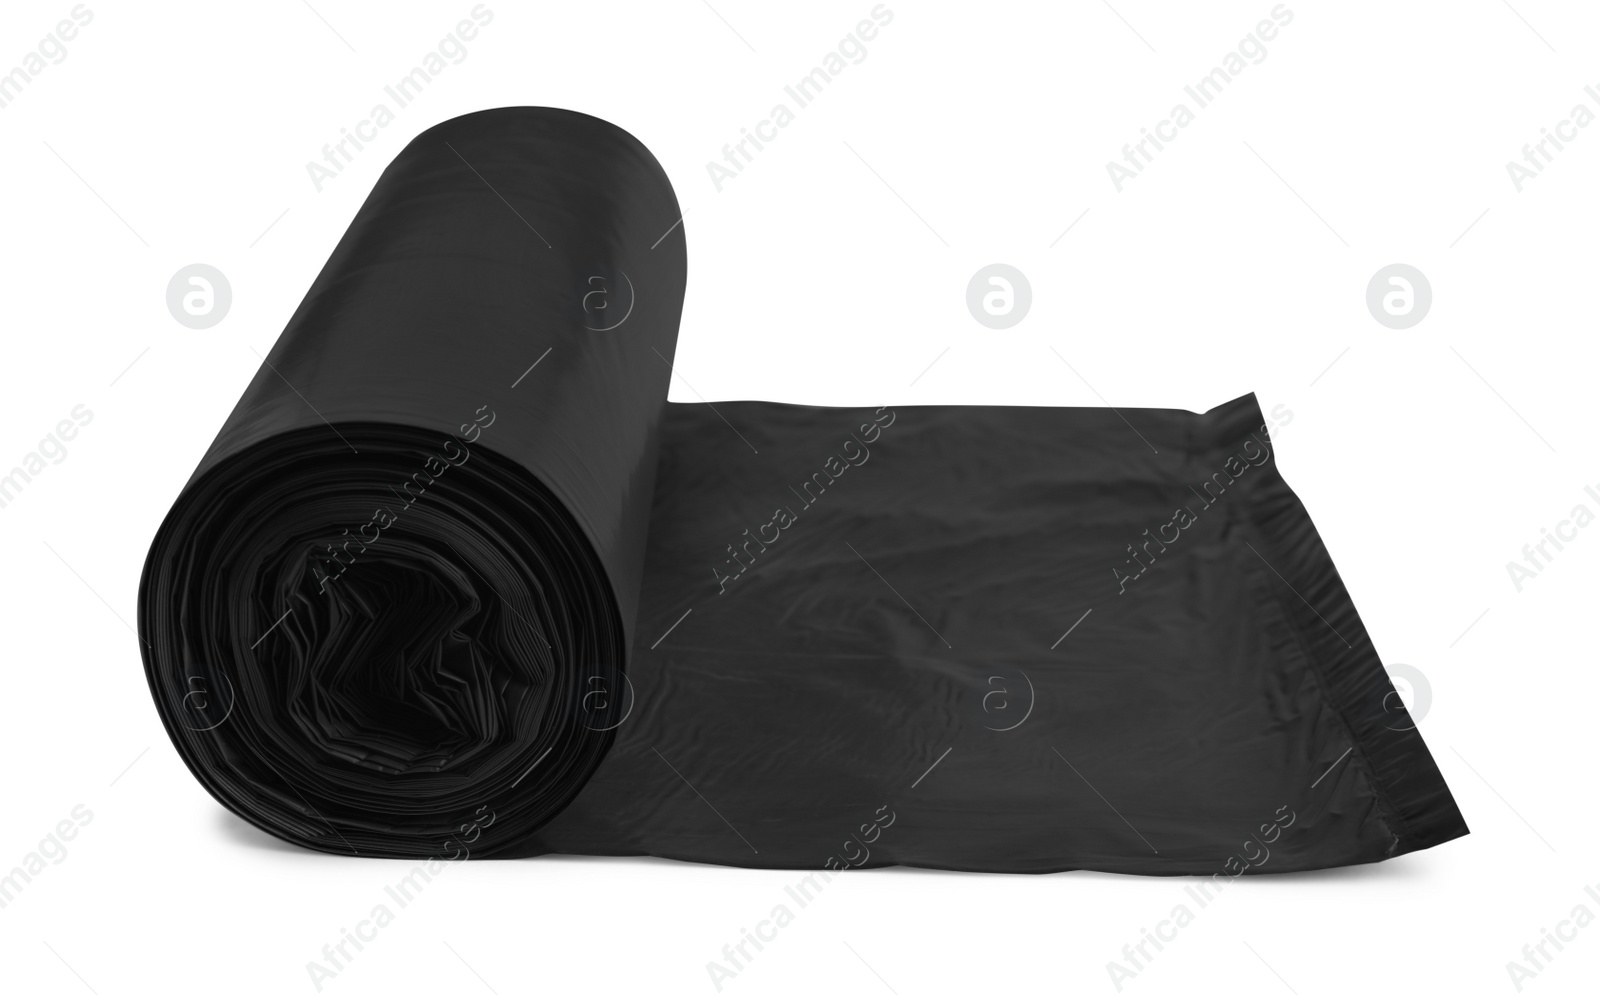 Photo of Roll of grey garbage bags on white background. Cleaning supplies